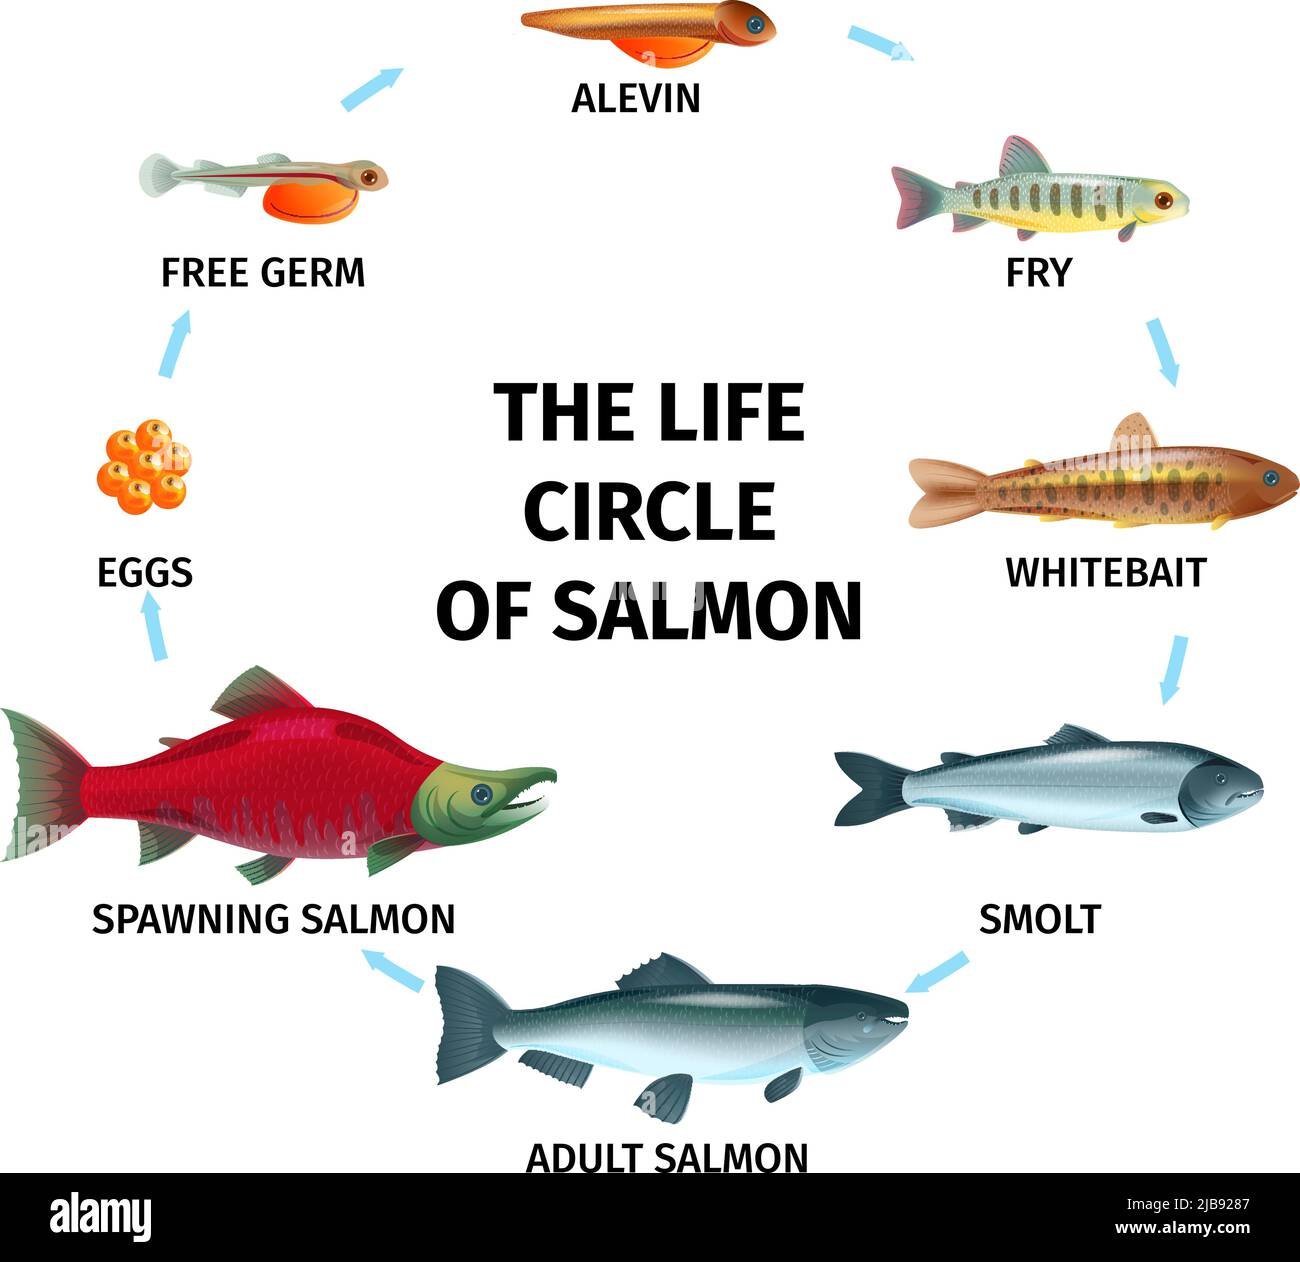 round-life-cycle-salmon-composition-with-circle-shaped-flowchart-and-images-of-fishes-of-different-age-vector-illustration-2JB9287.jpg